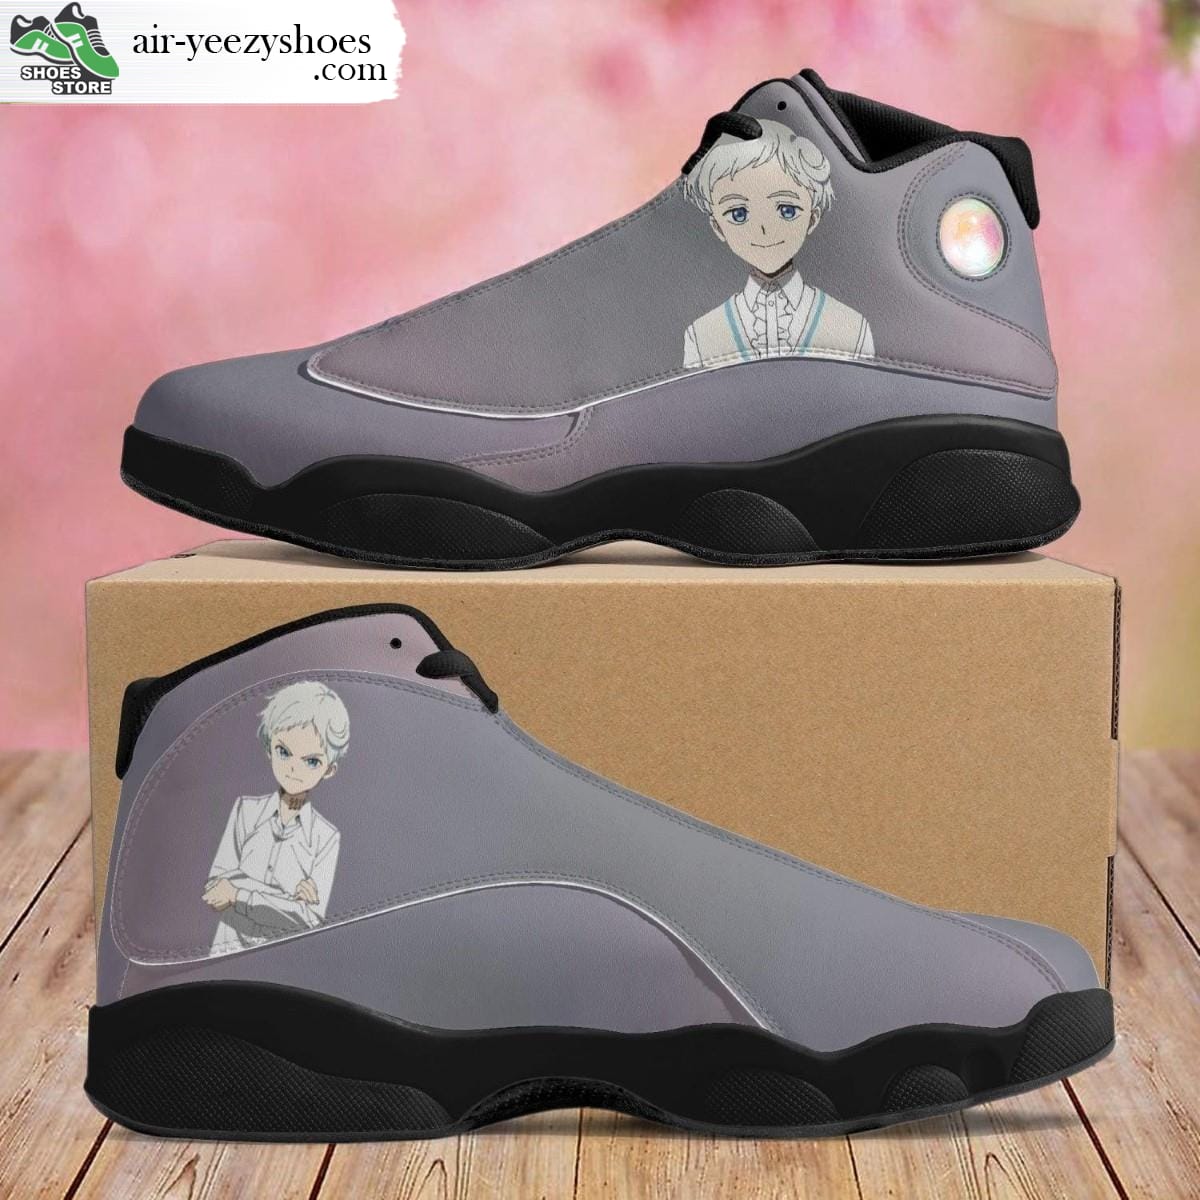 Norman Jordan 13 Shoes, The Promised Neverland Gift